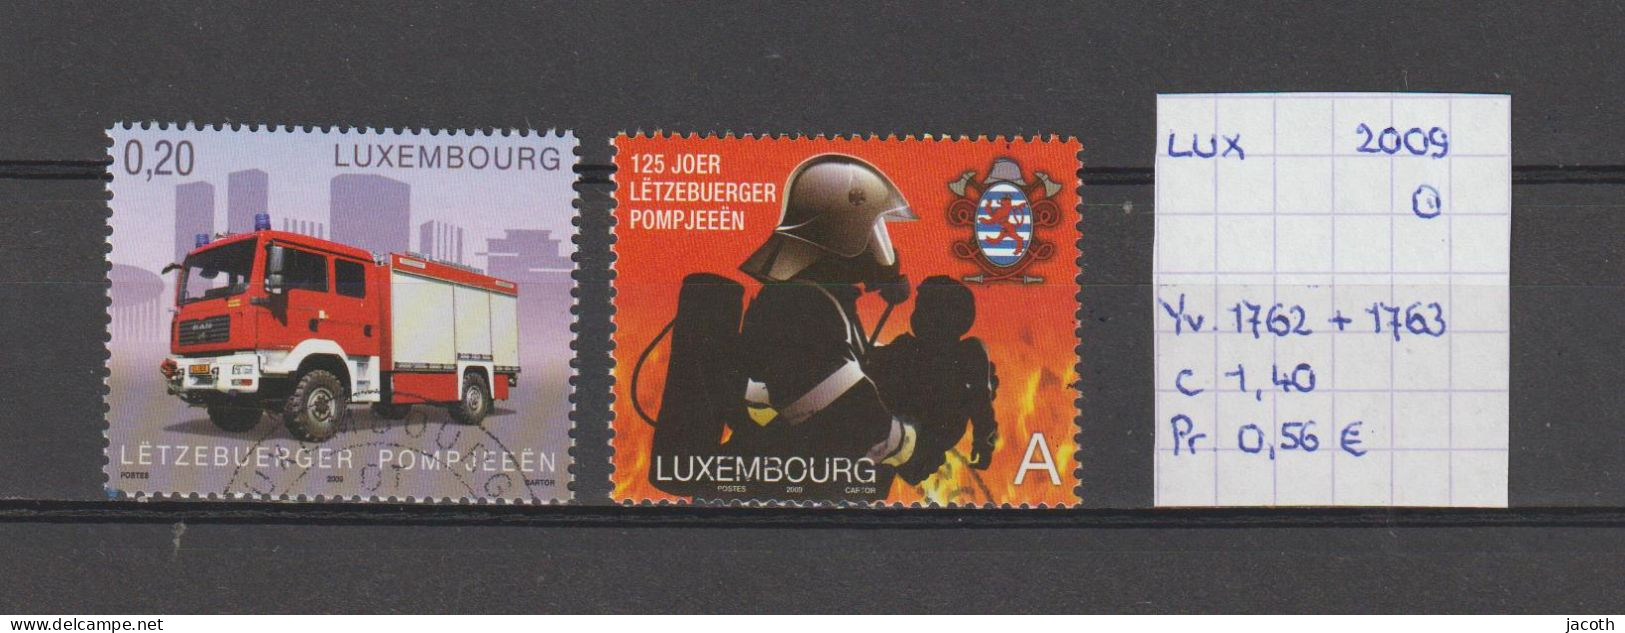 (TJ) Luxembourg 2009 - YT 1762 + 1763 (gest./obl./used) - Gebraucht